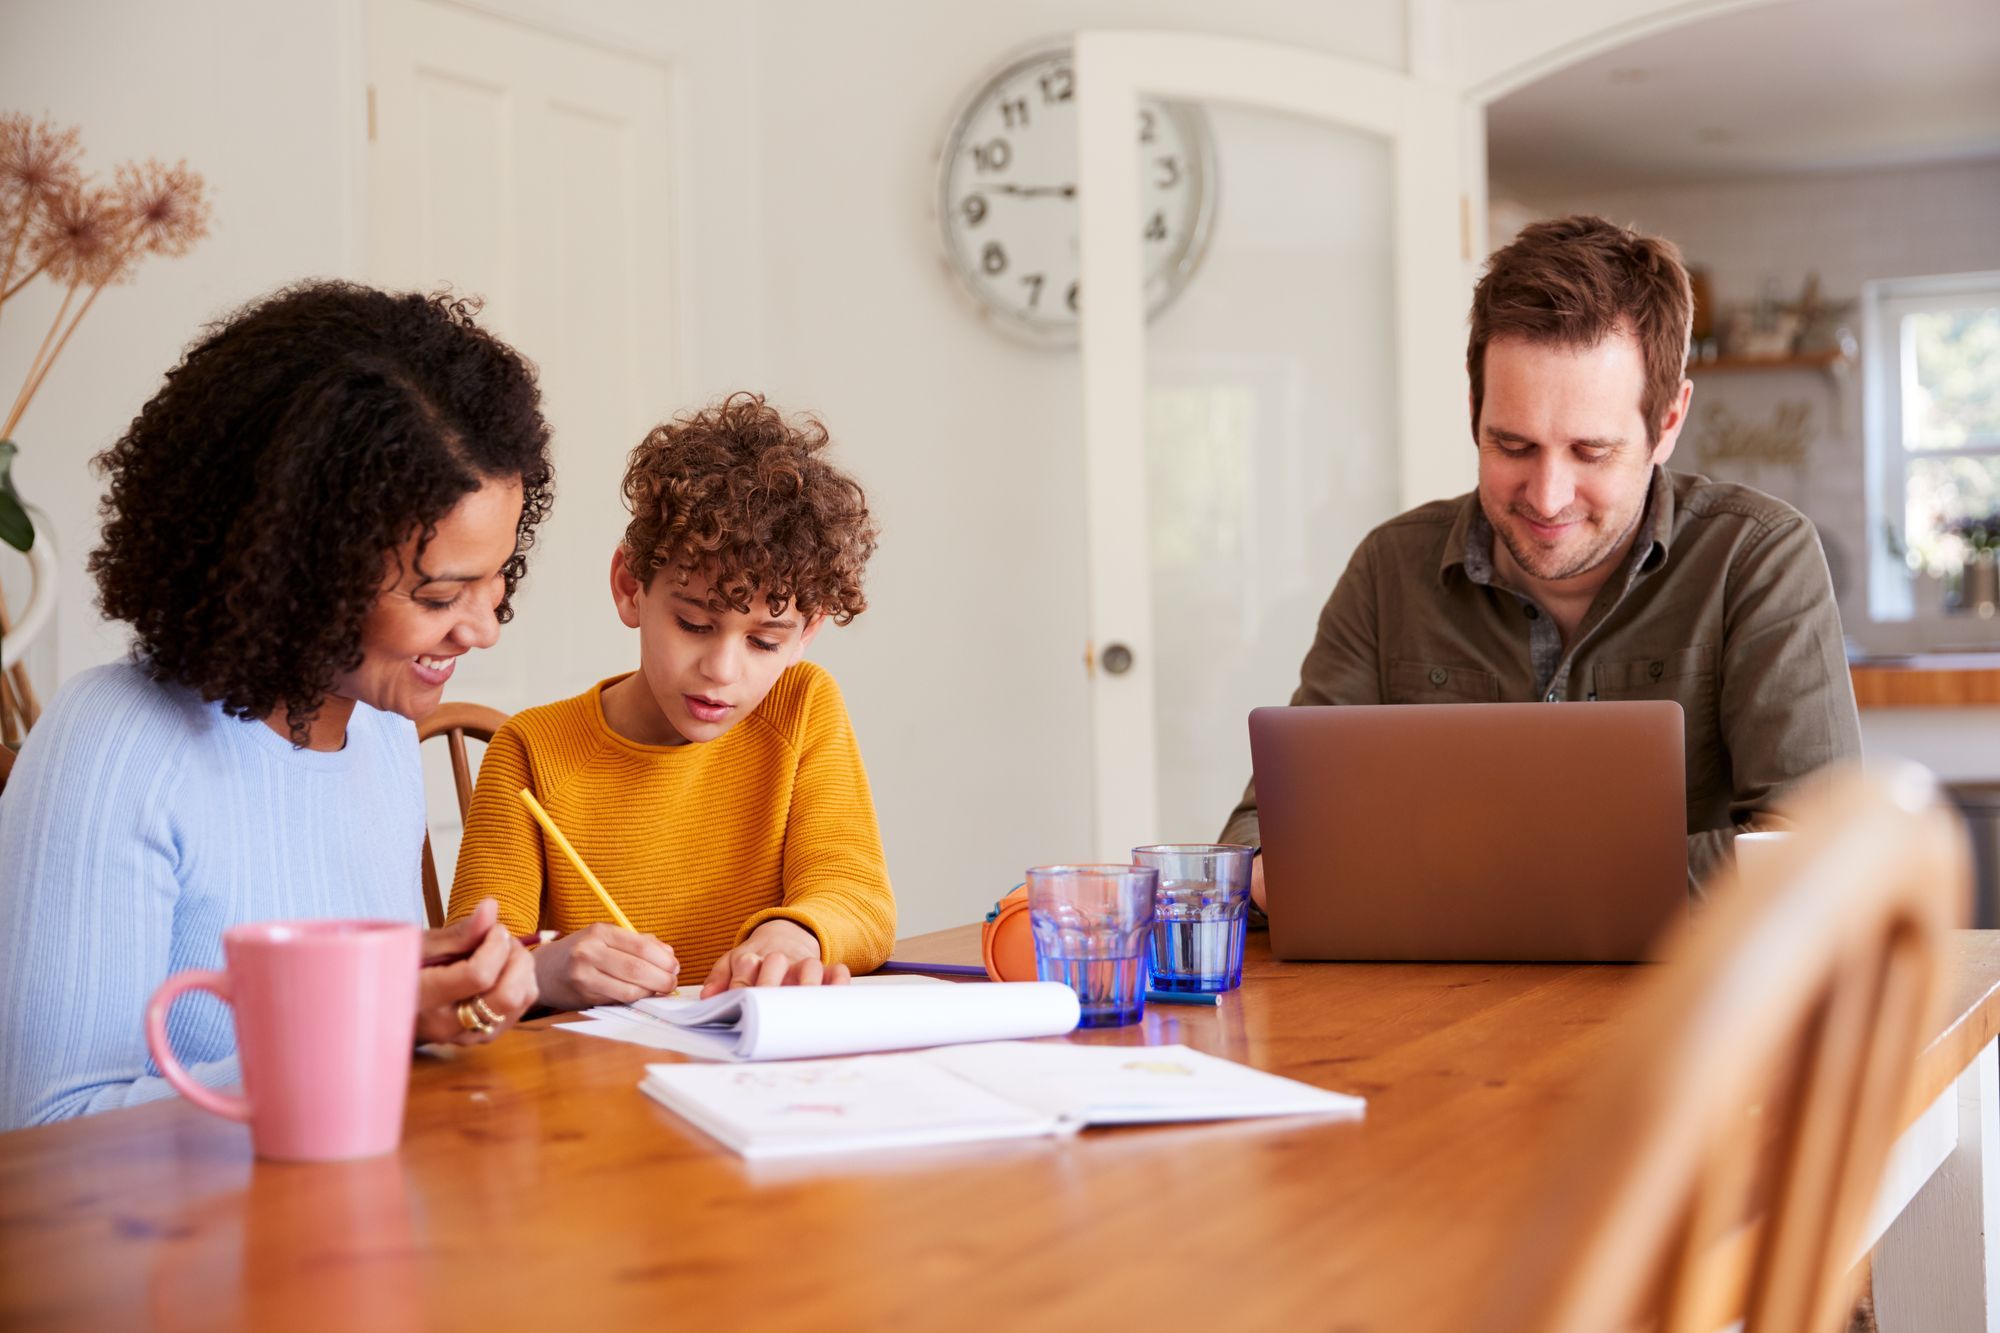 How to Keep Your Kids Engaged and Motivated During Remote Learning